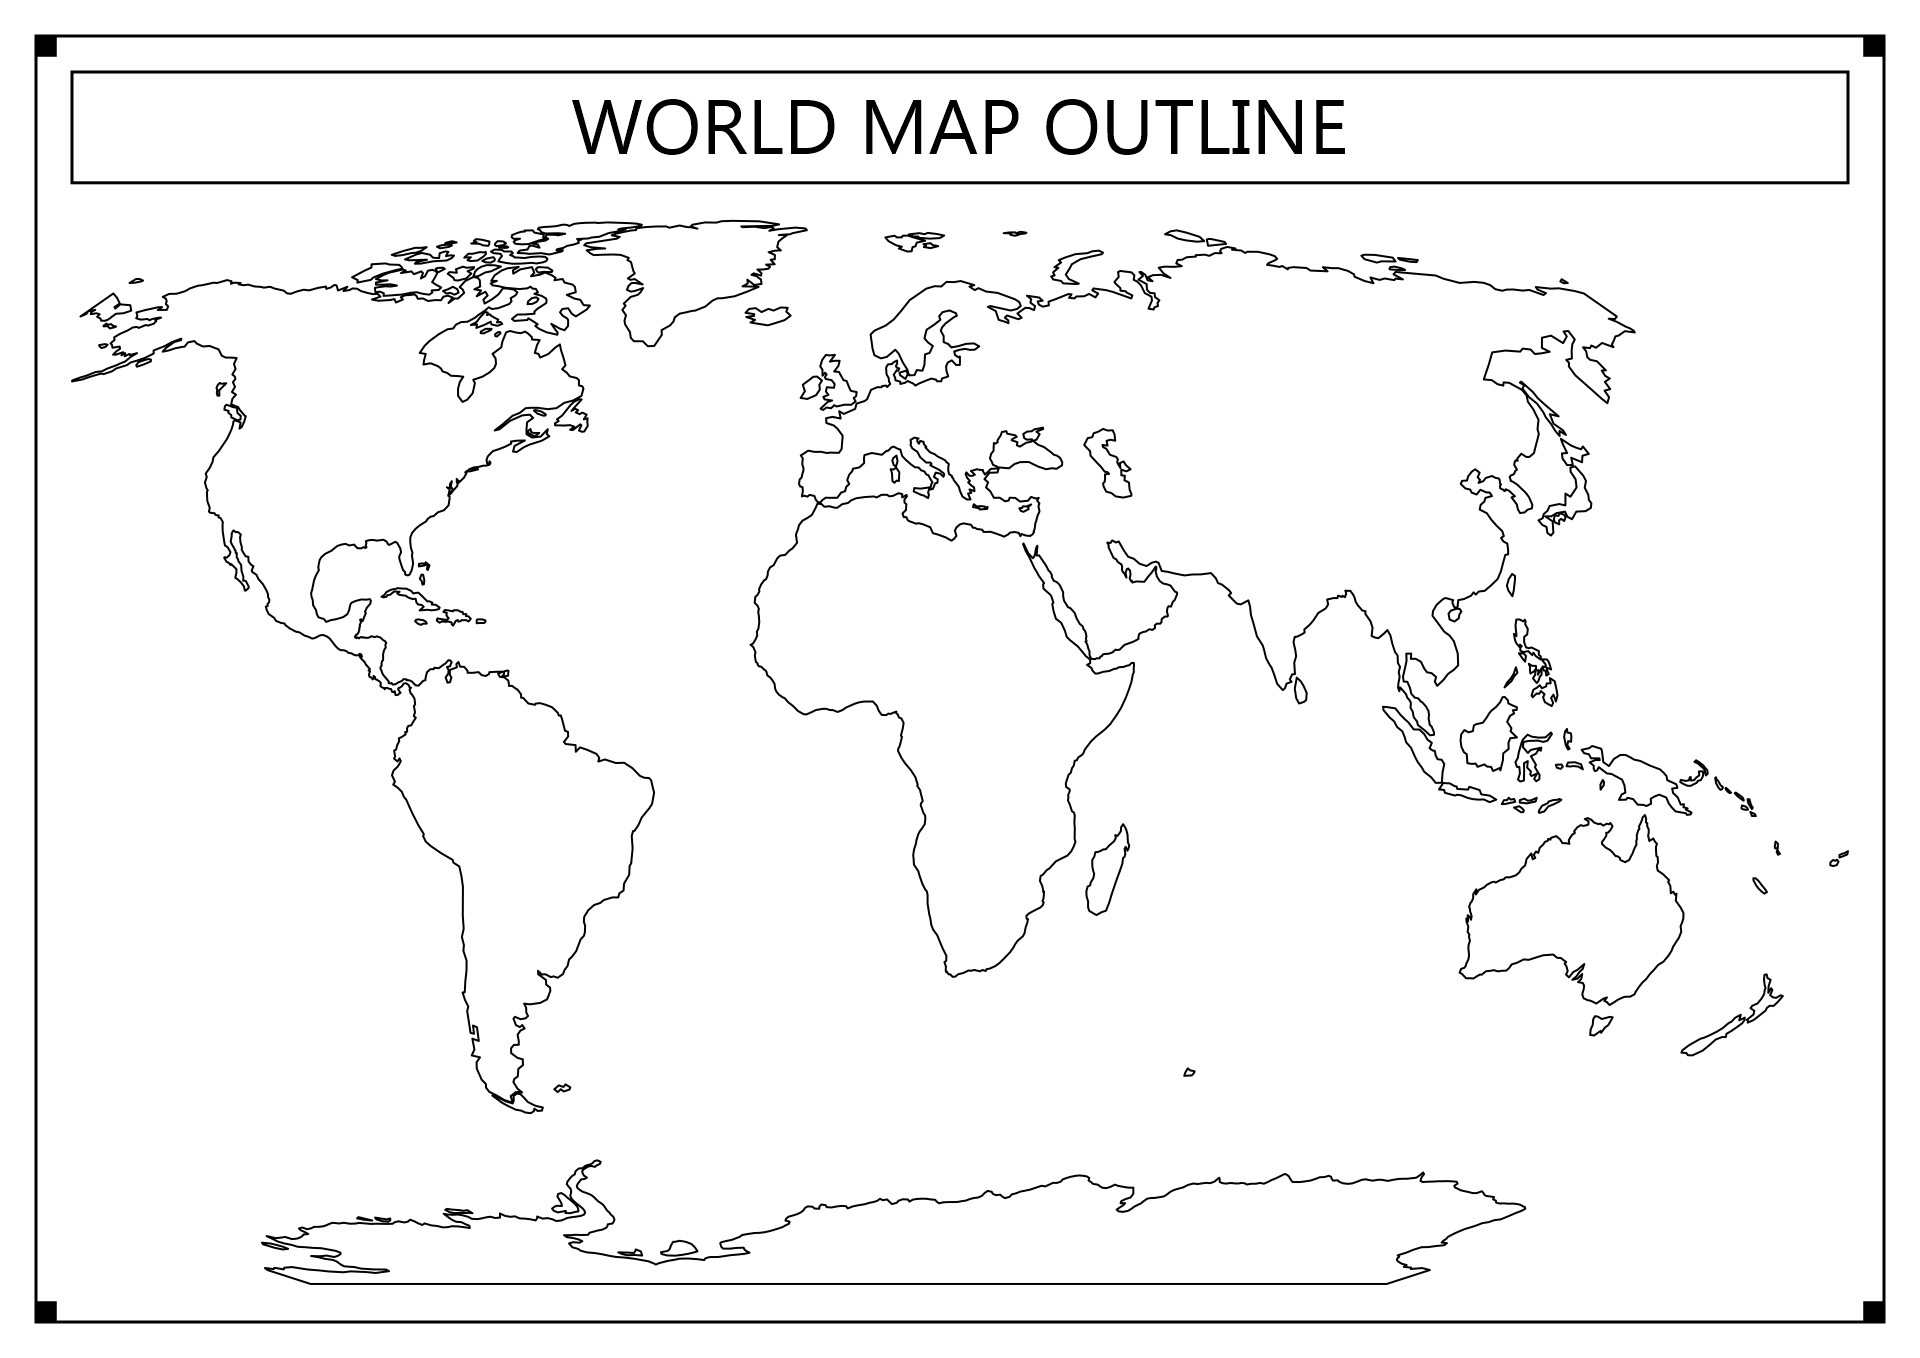 14 Blank Continents And Oceans Worksheets / worksheeto.com